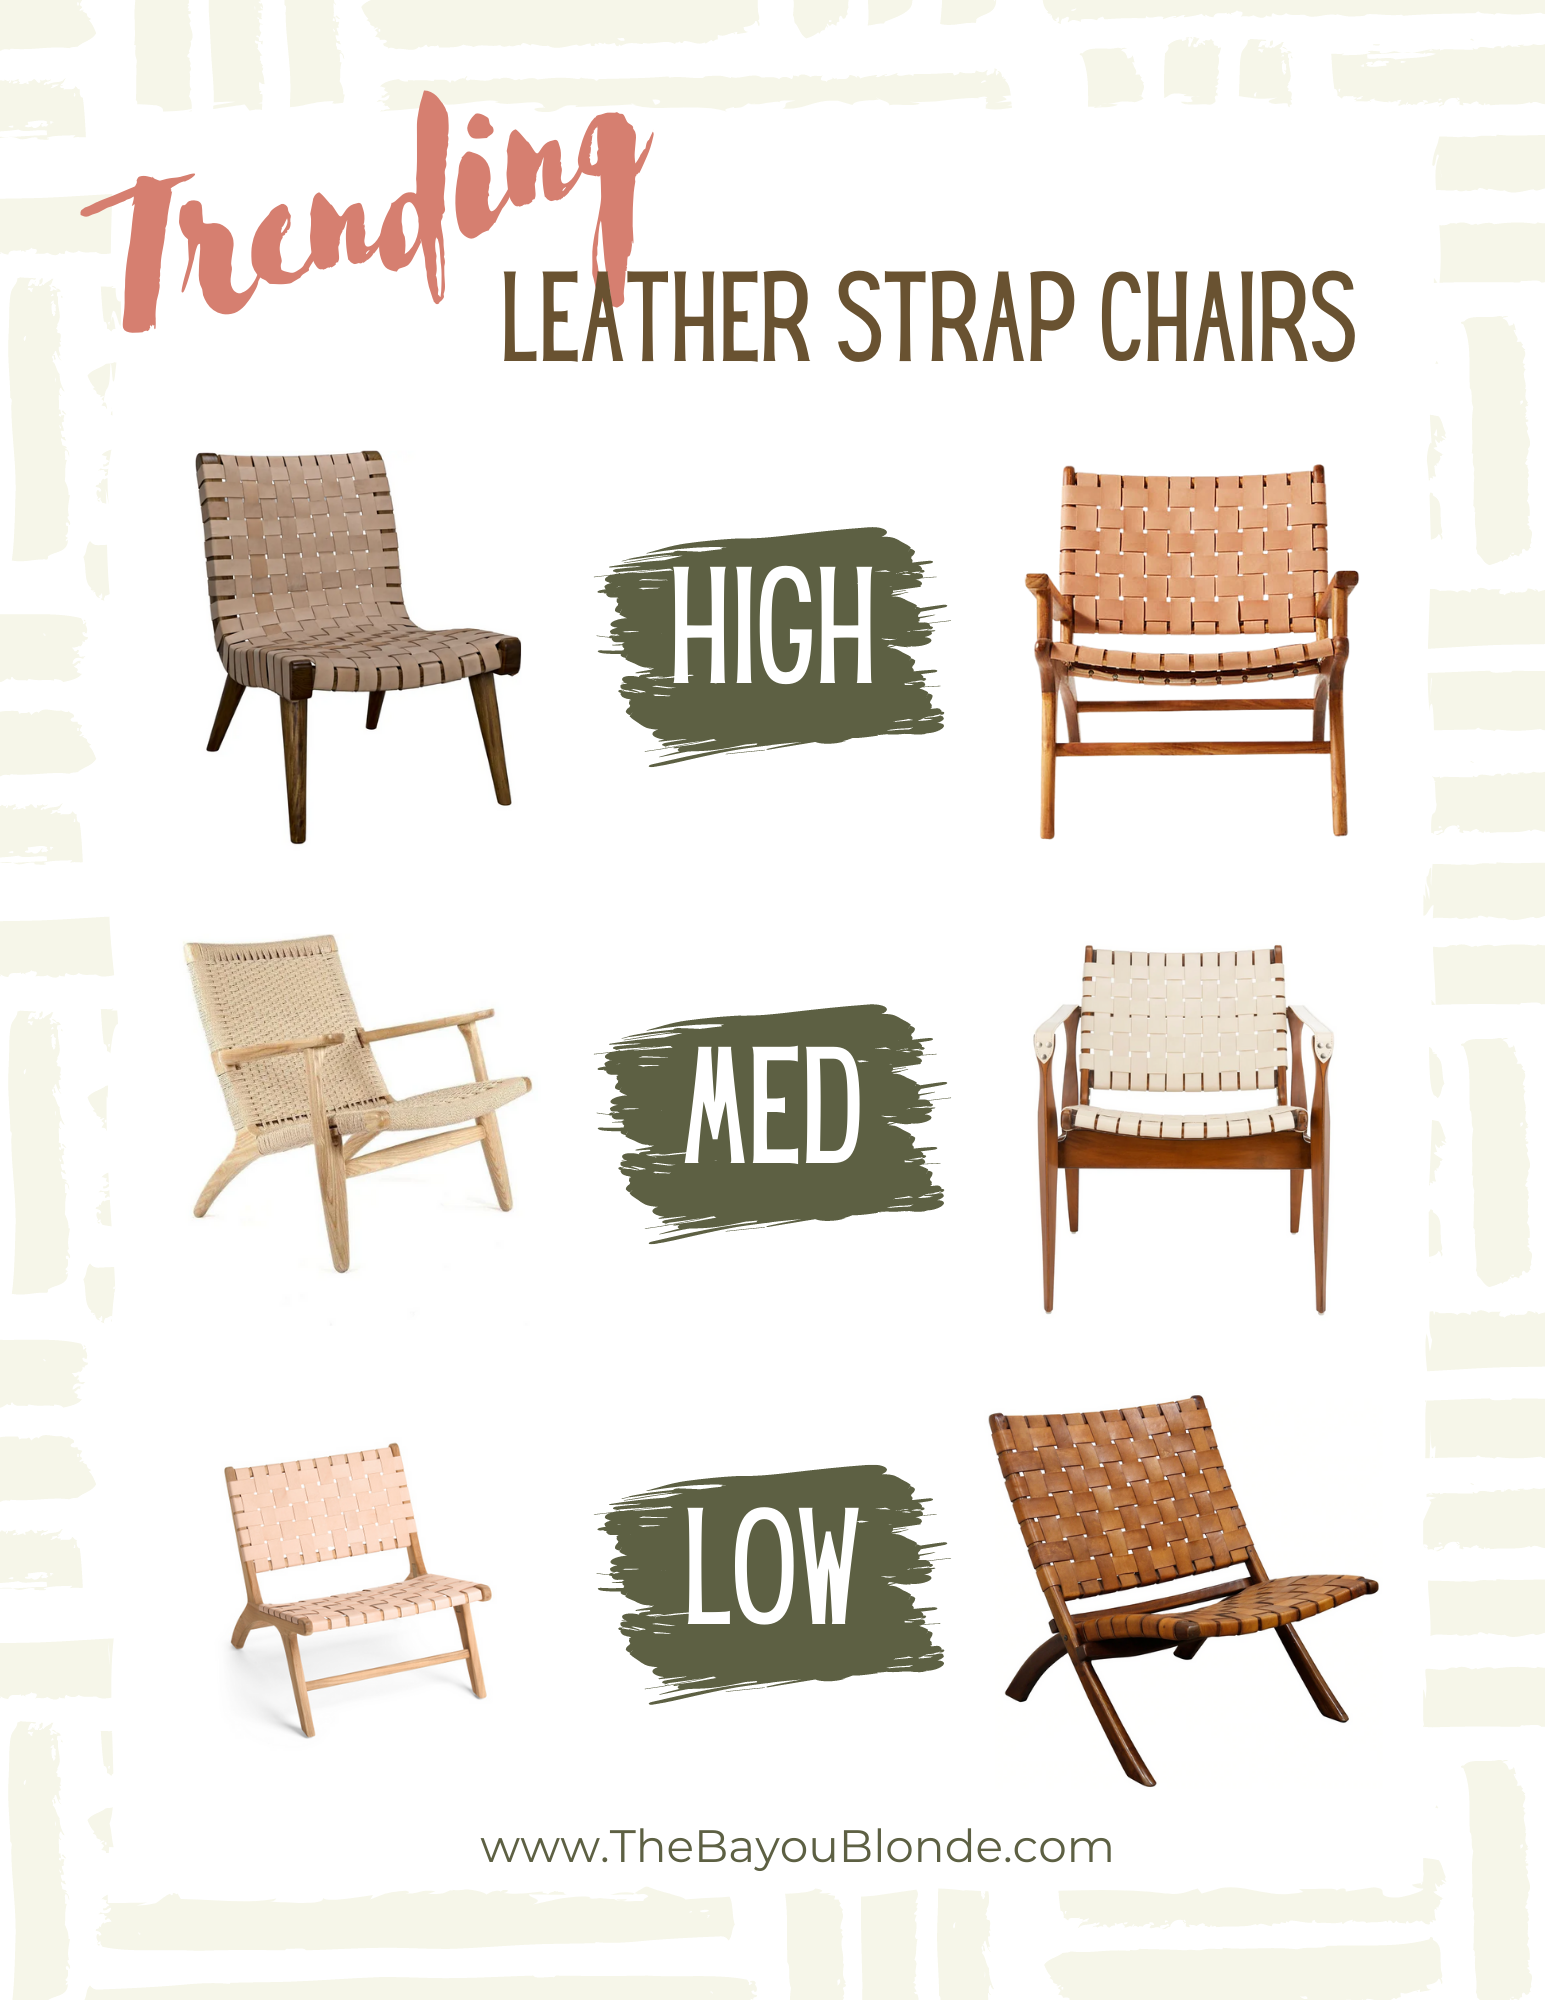 Trending: Leather Strap Chairs